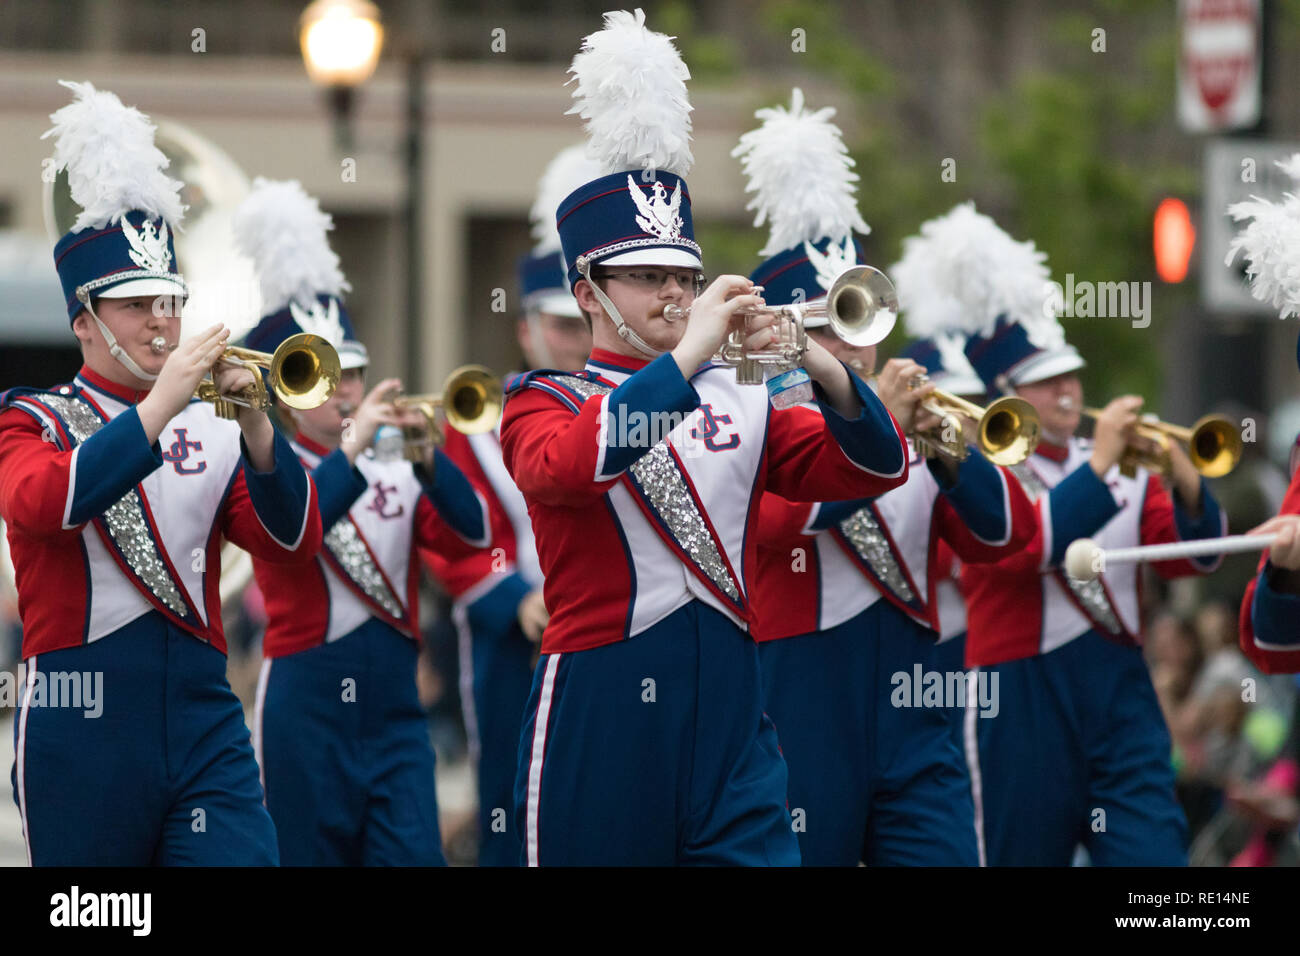 Louisville, Kentucky, USA - May 03, 2018: The Pegasus Parade, Members of the Jennings County High Shcool marching band from North Vernon, indiana, goi Stock Photo